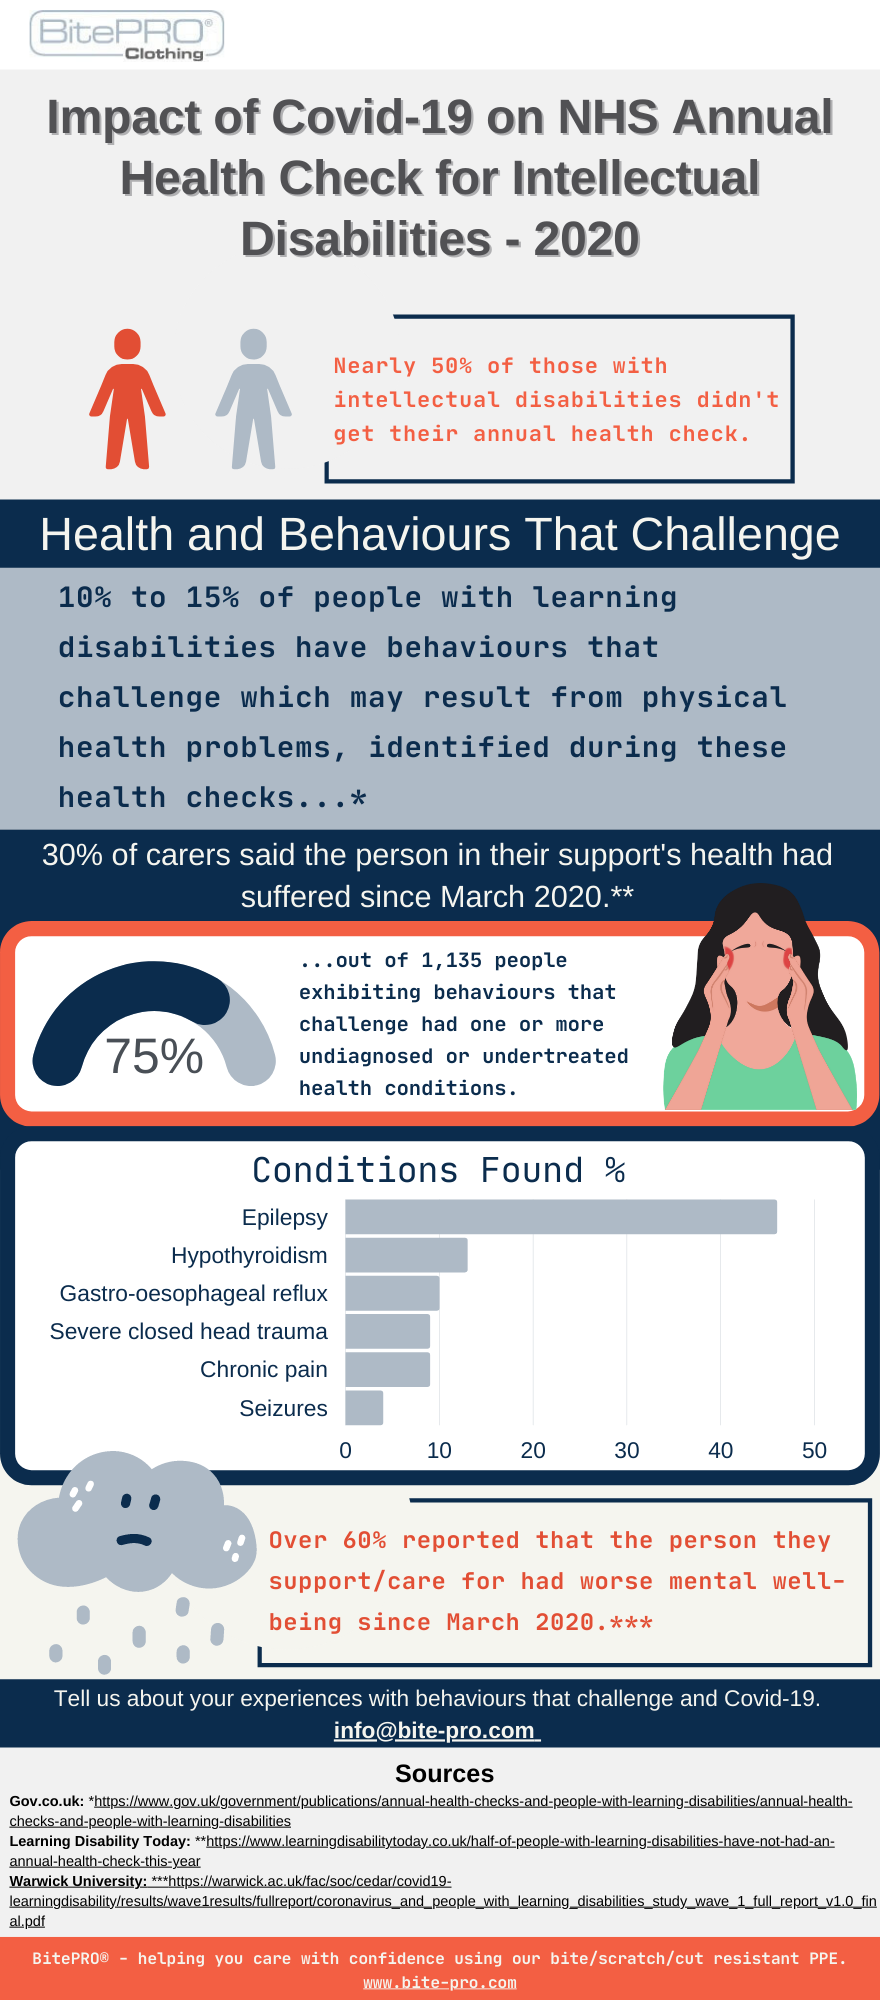 Impact of Covid-19 on NHS Annual Health Check for Intellectual Disabilities infographic